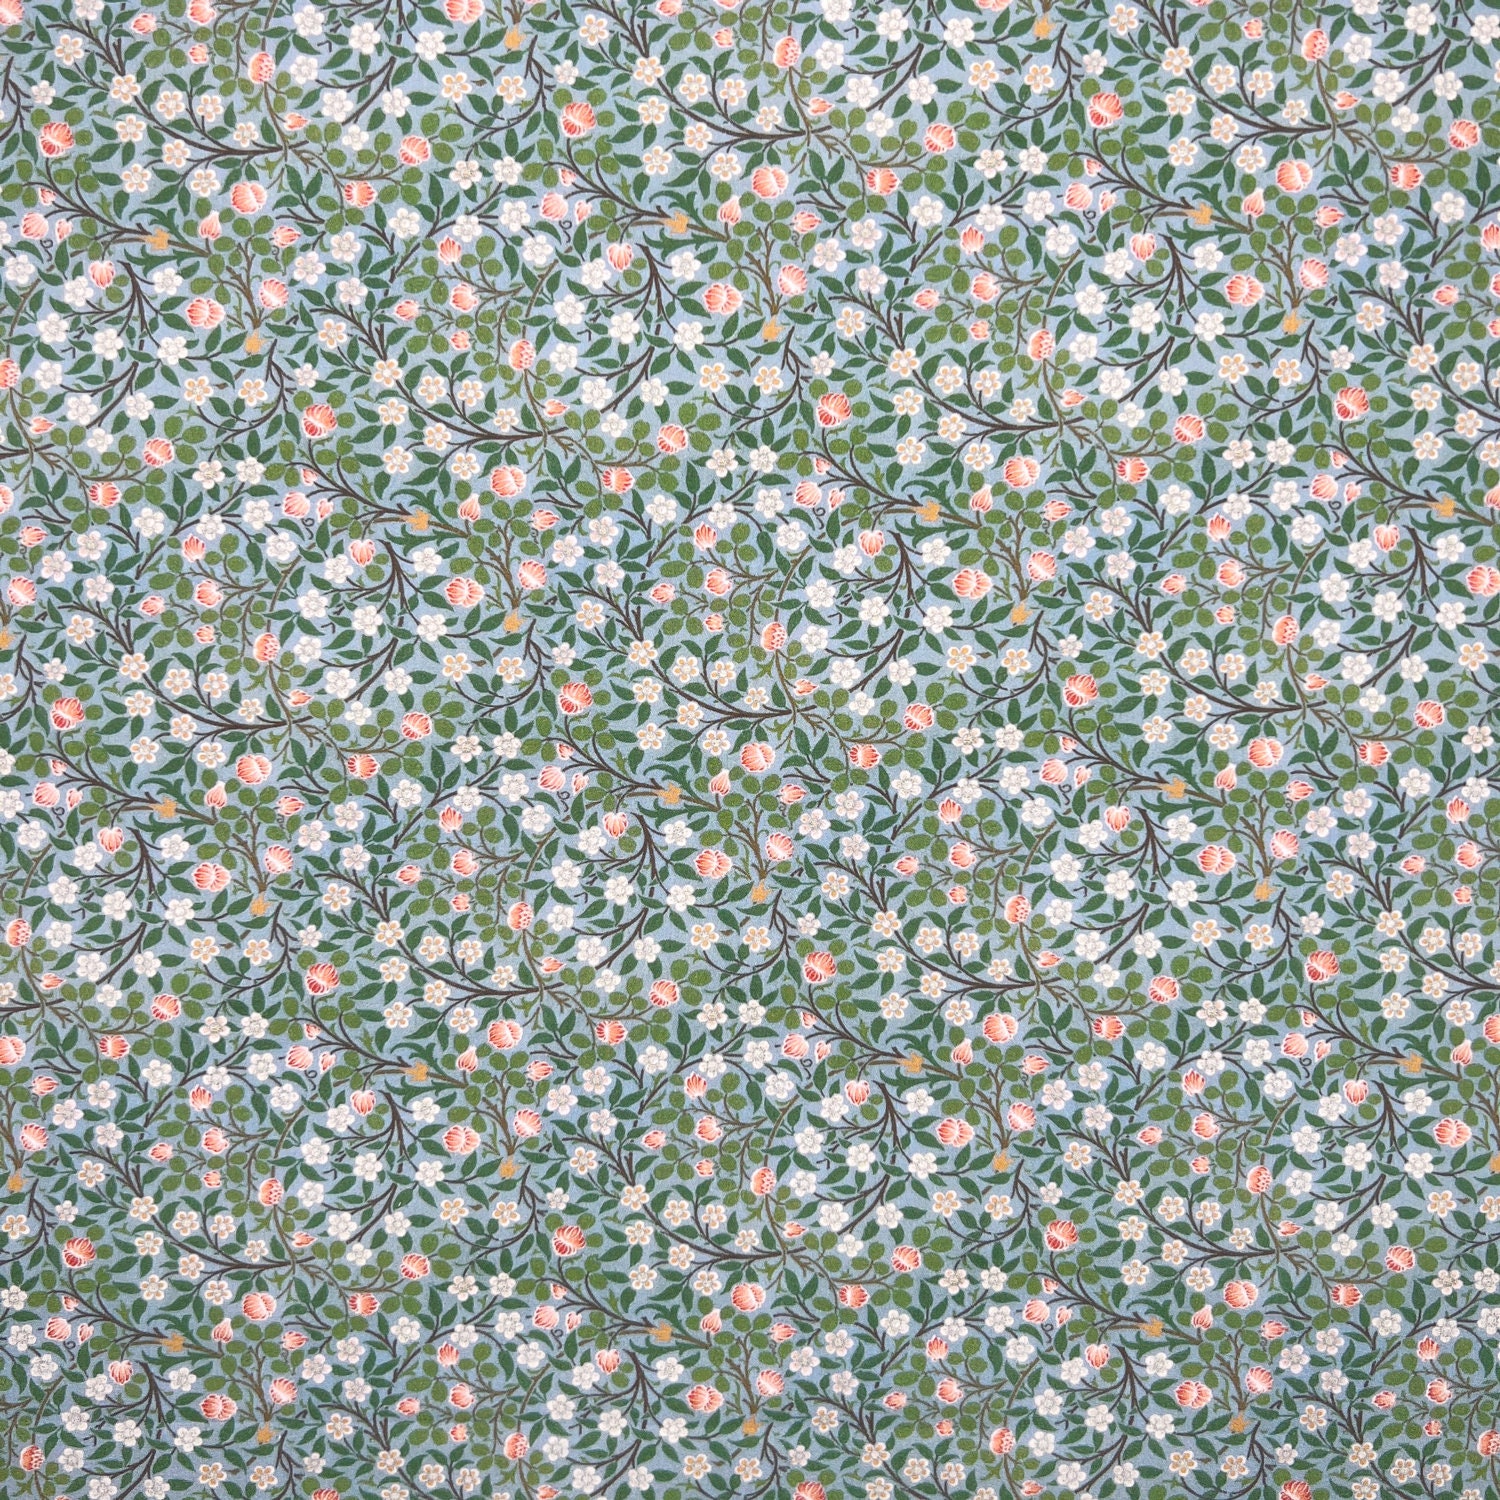 Vintage Fabric by the Yard, Cotton Percal Fabric, Vintage Gold